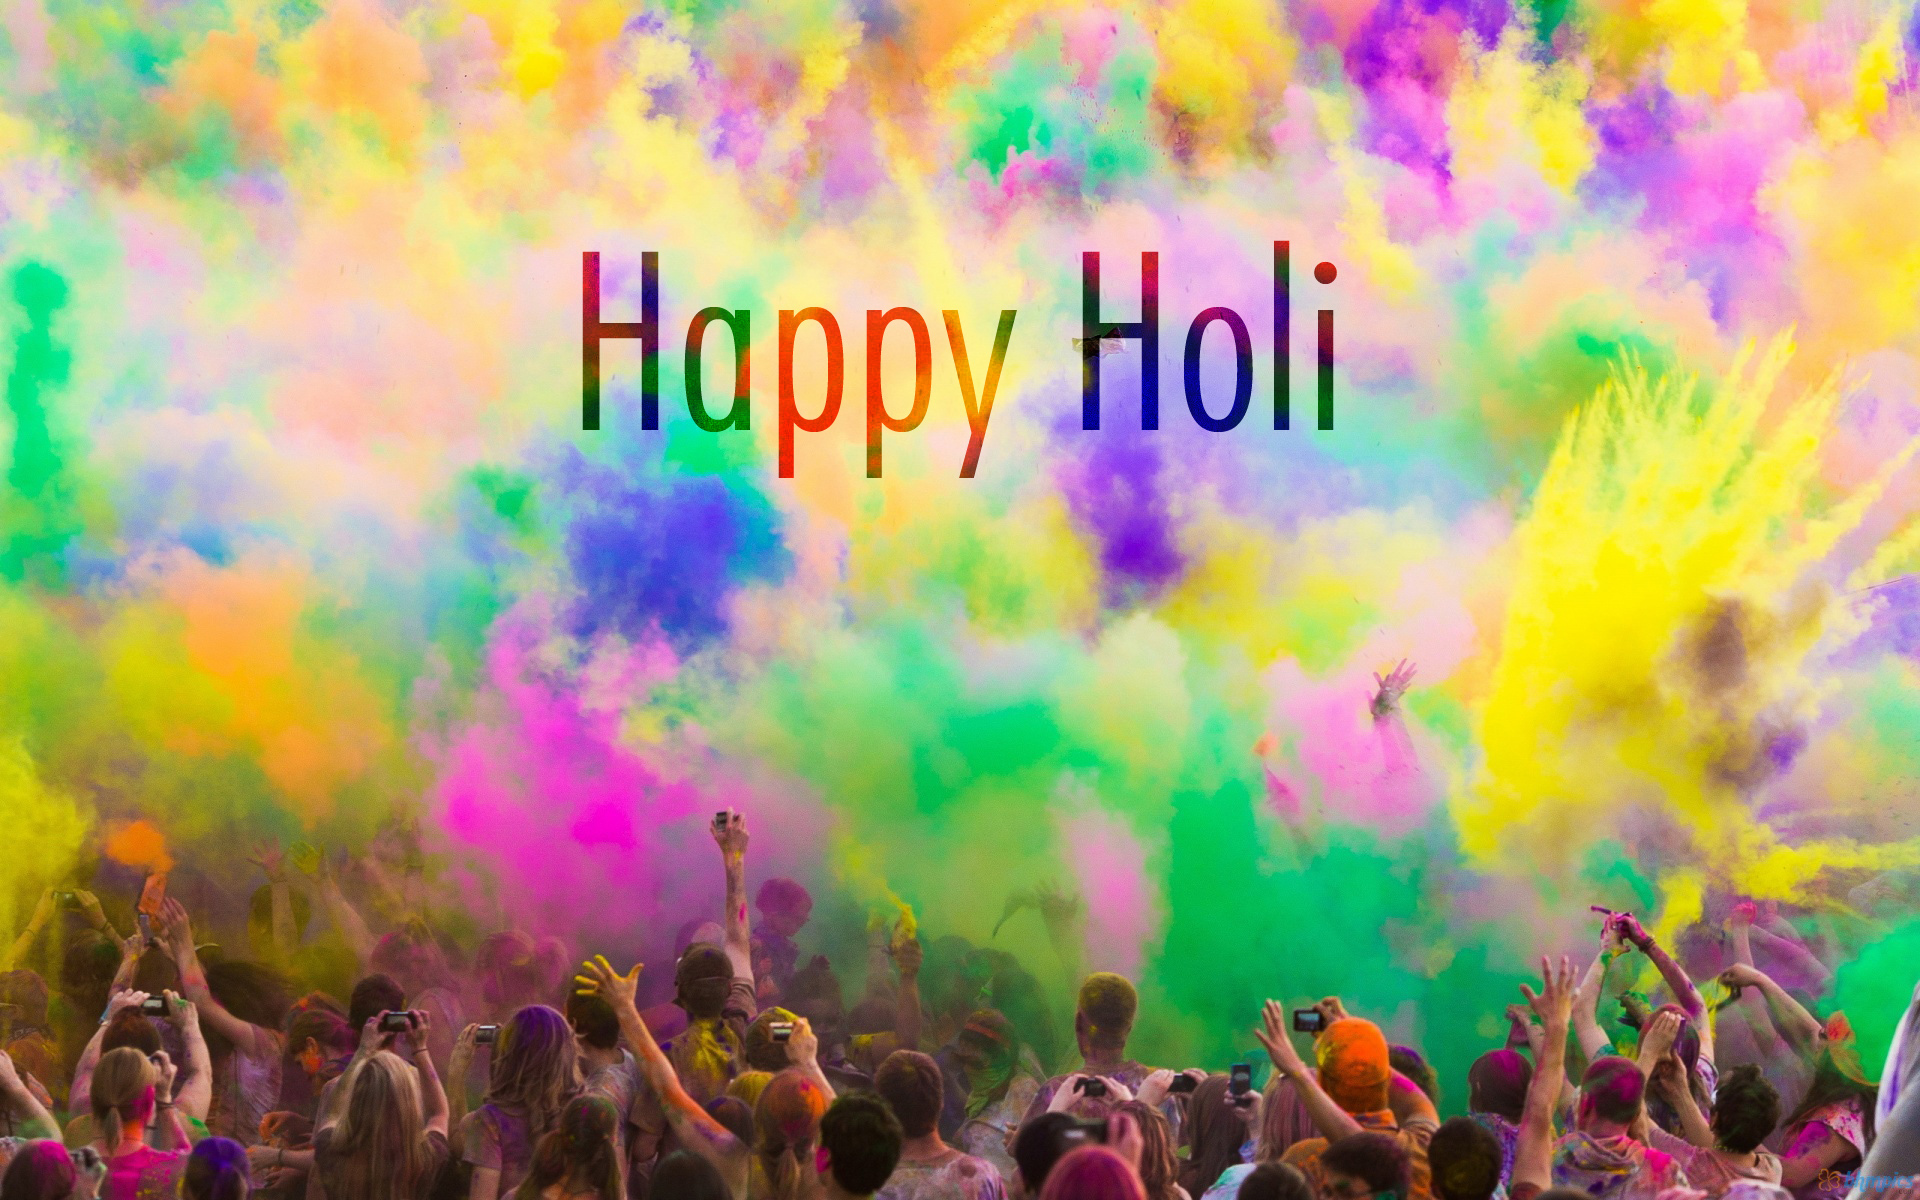 Happy Holi 2016 messages